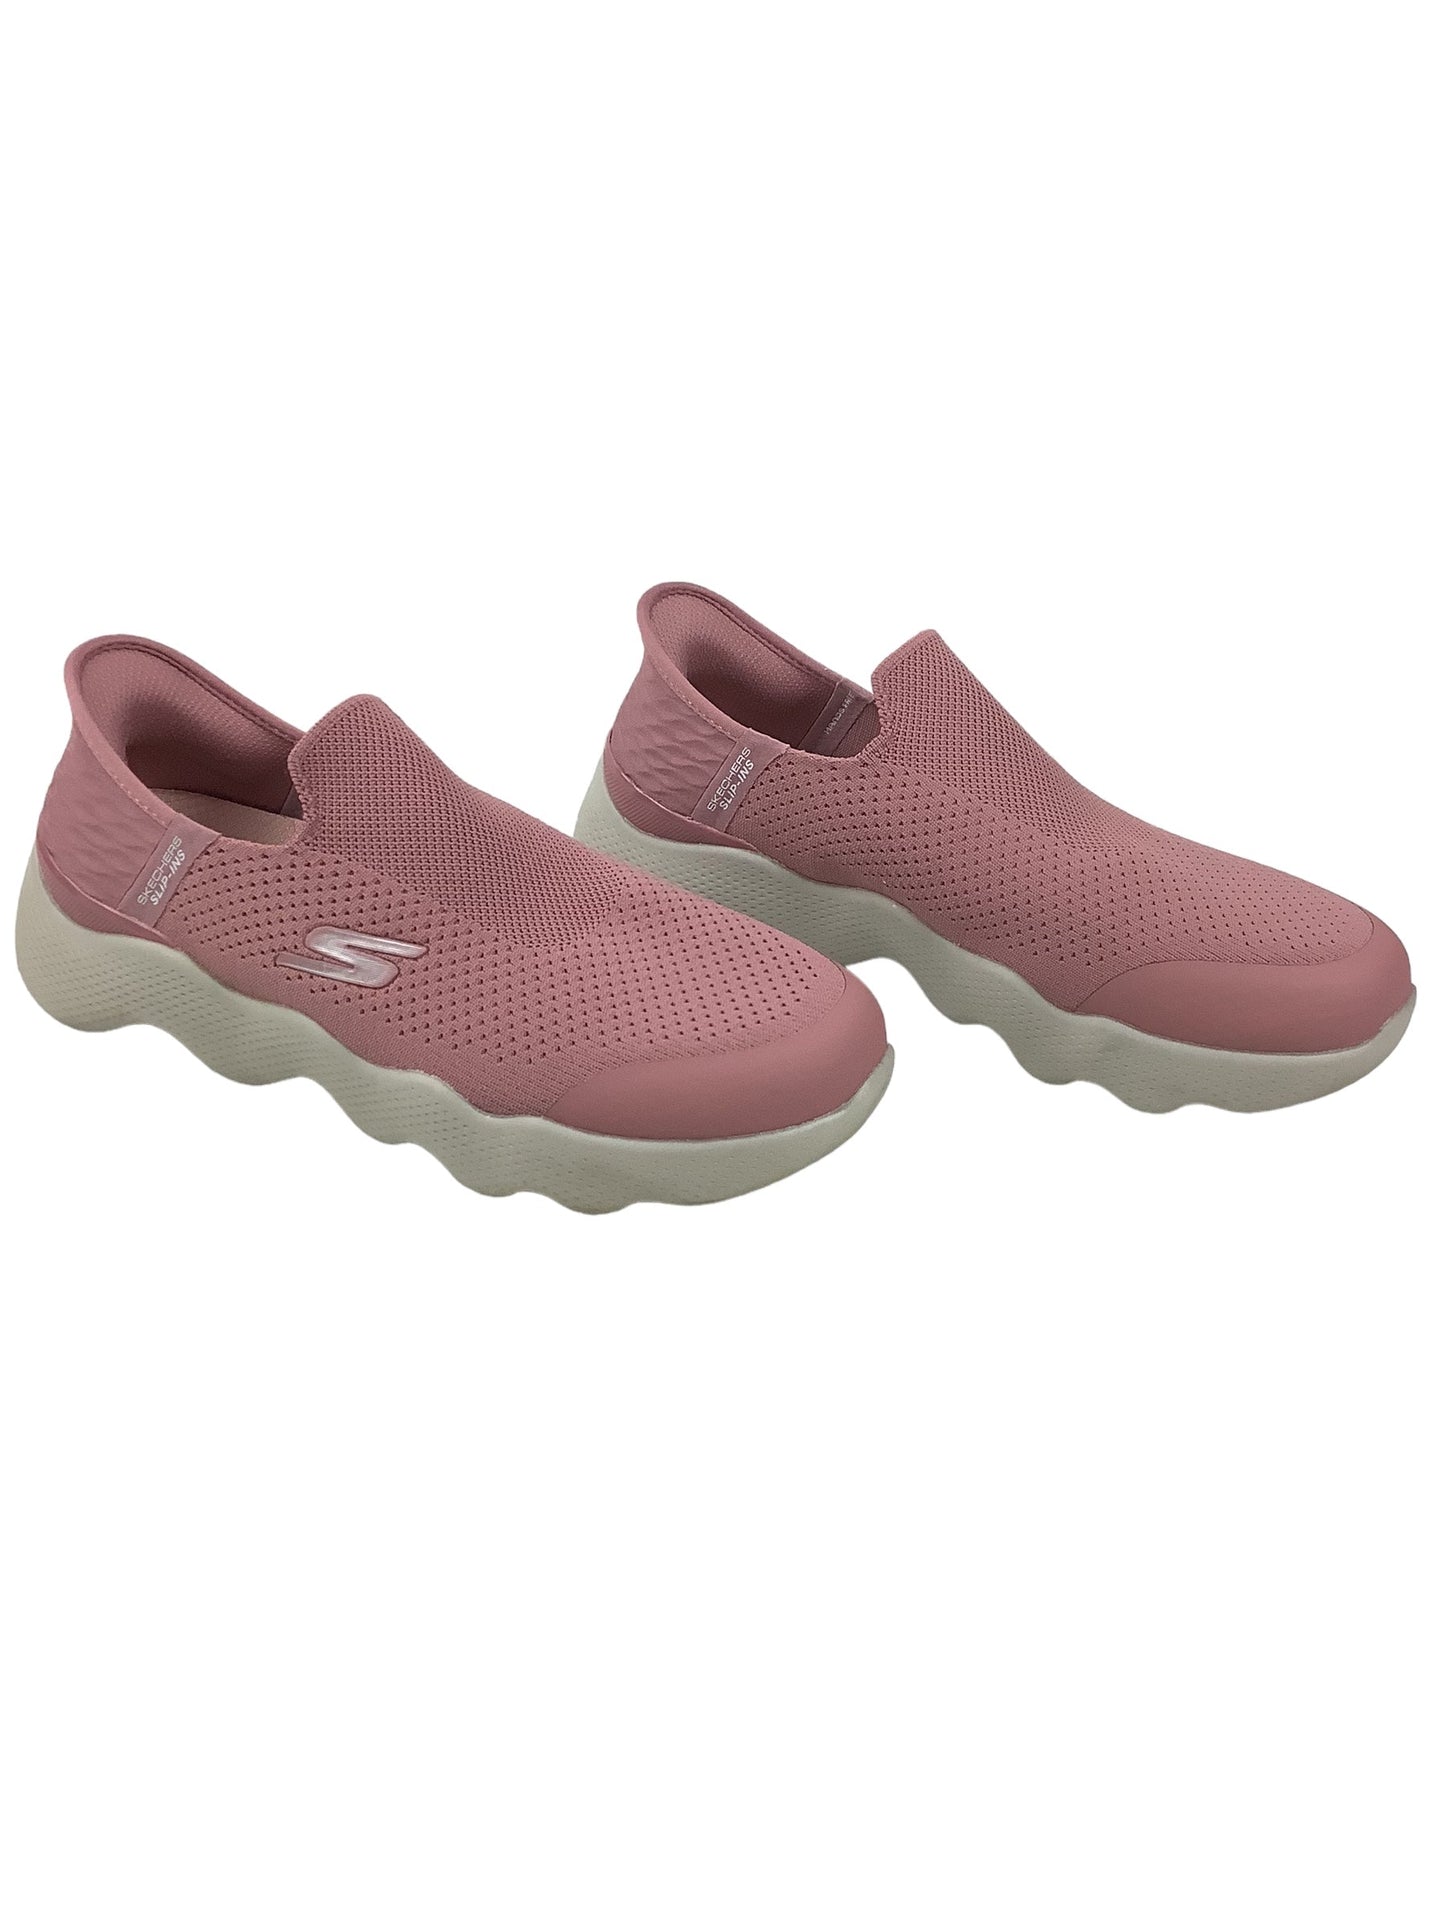 Pink Shoes Athletic Skechers, Size 9